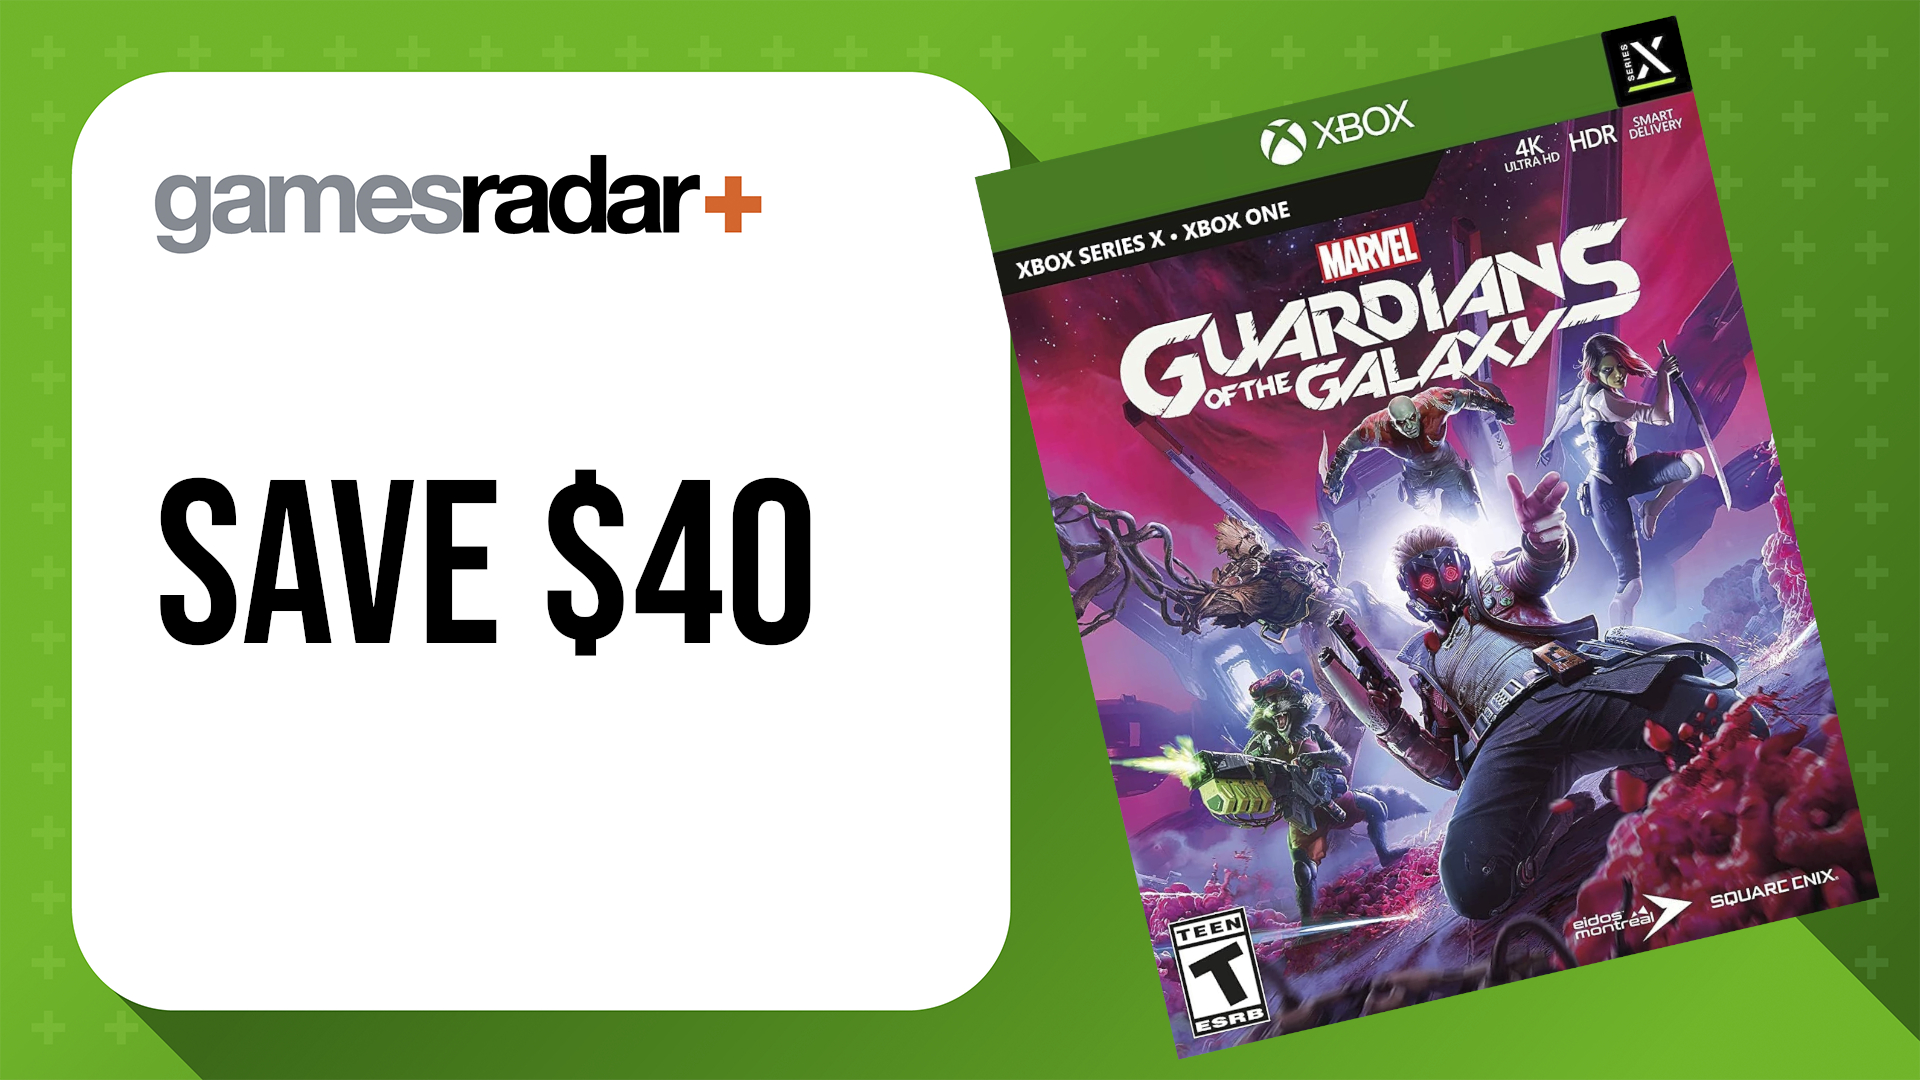 Amazon Prime Day Xbox sales with Guardians of the Galaxy game box